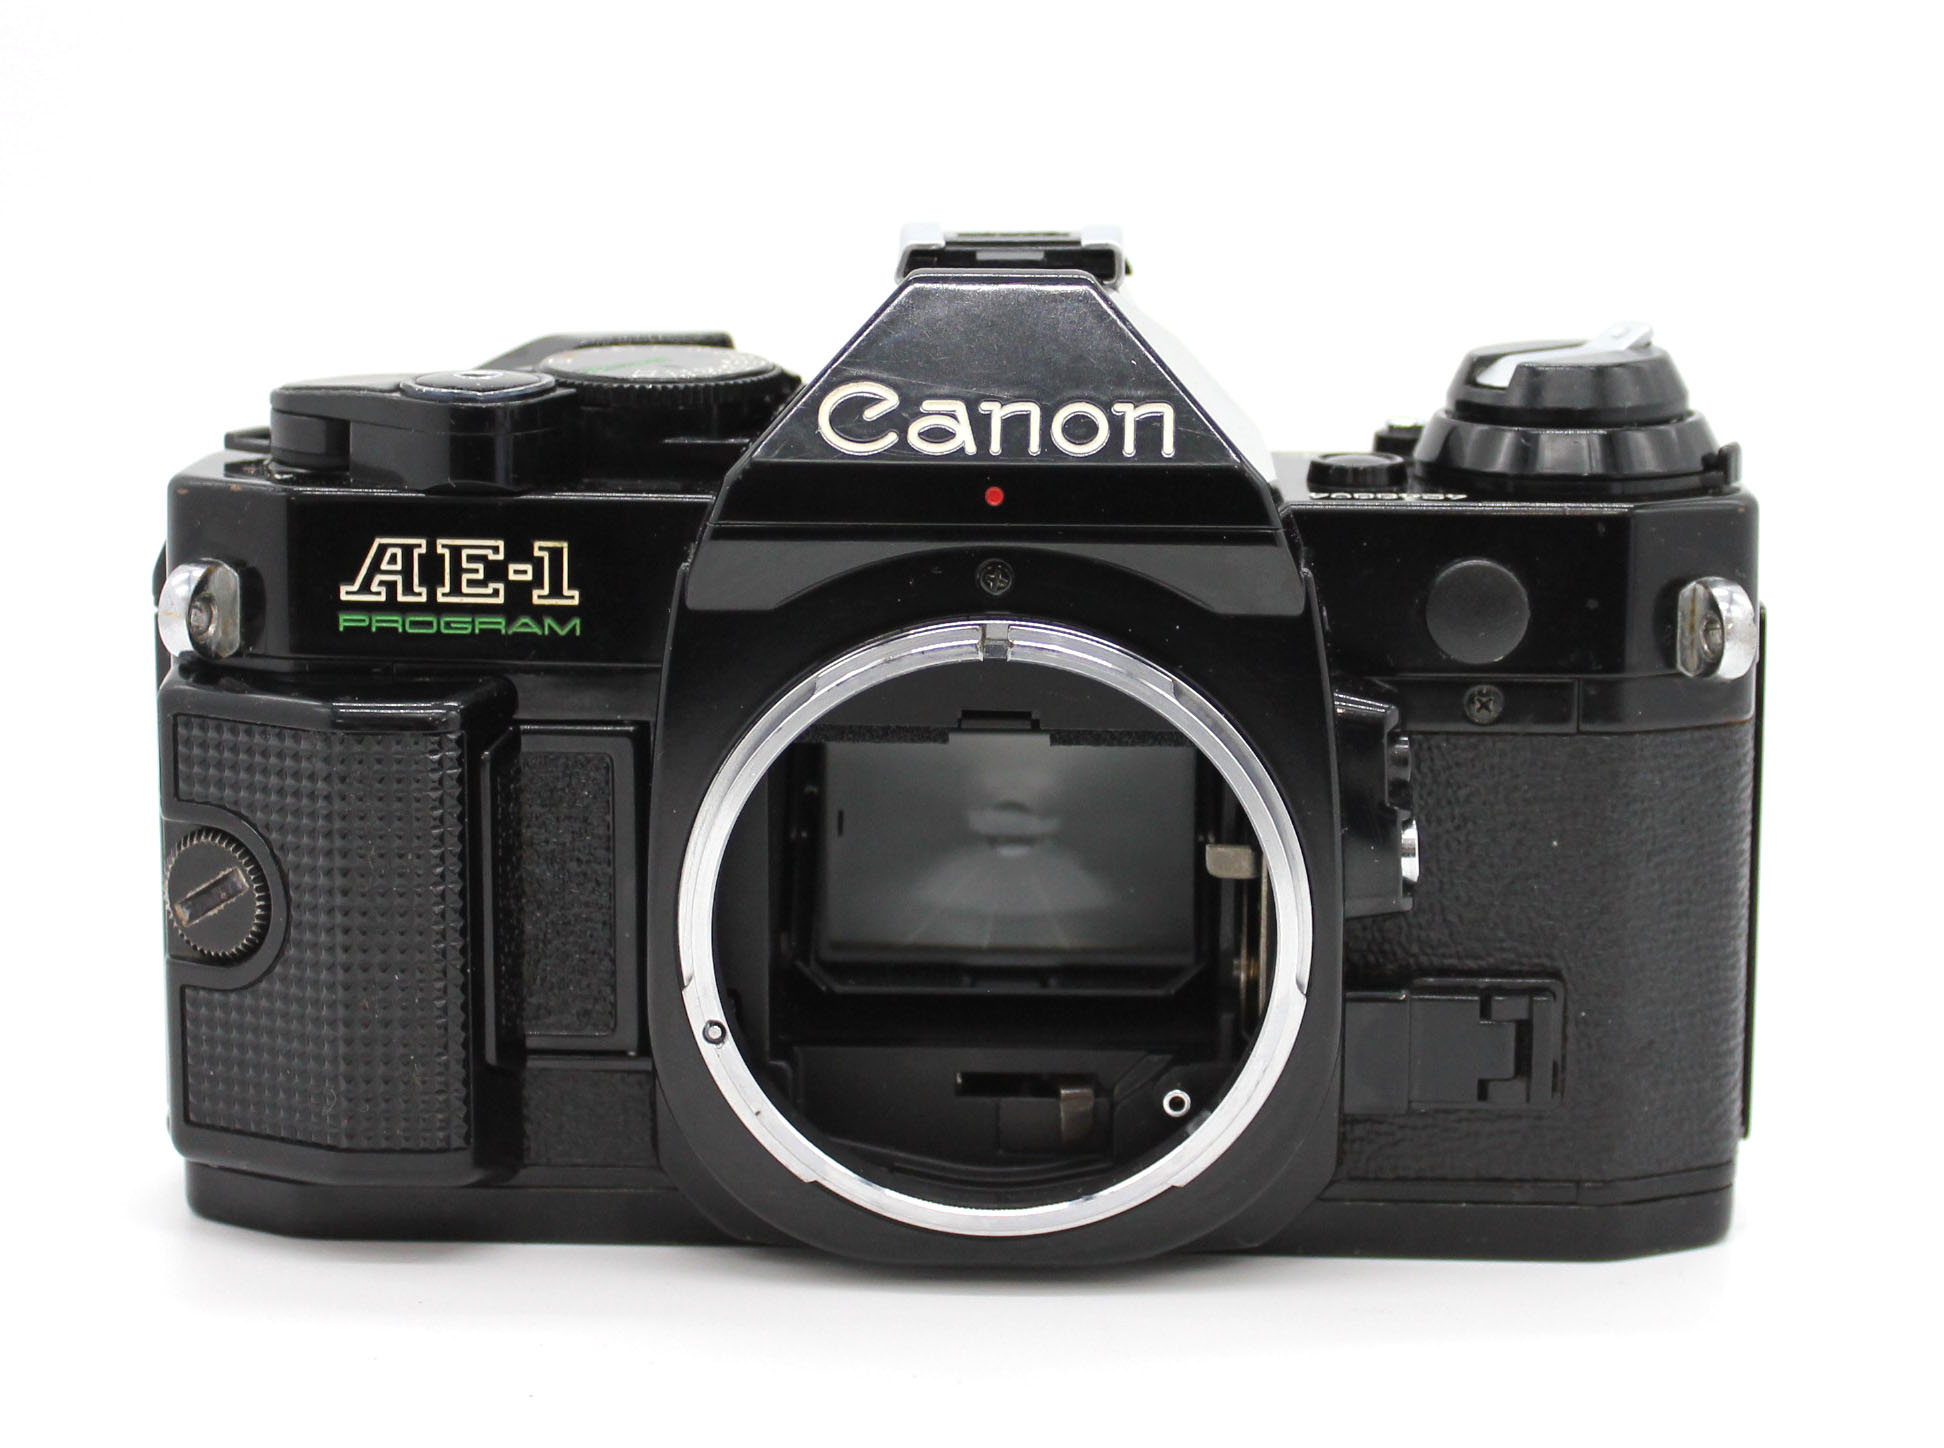 Canon AE-1 Program SLR Camera with New FD 35-70mm F/2.8-3.5 Zoom